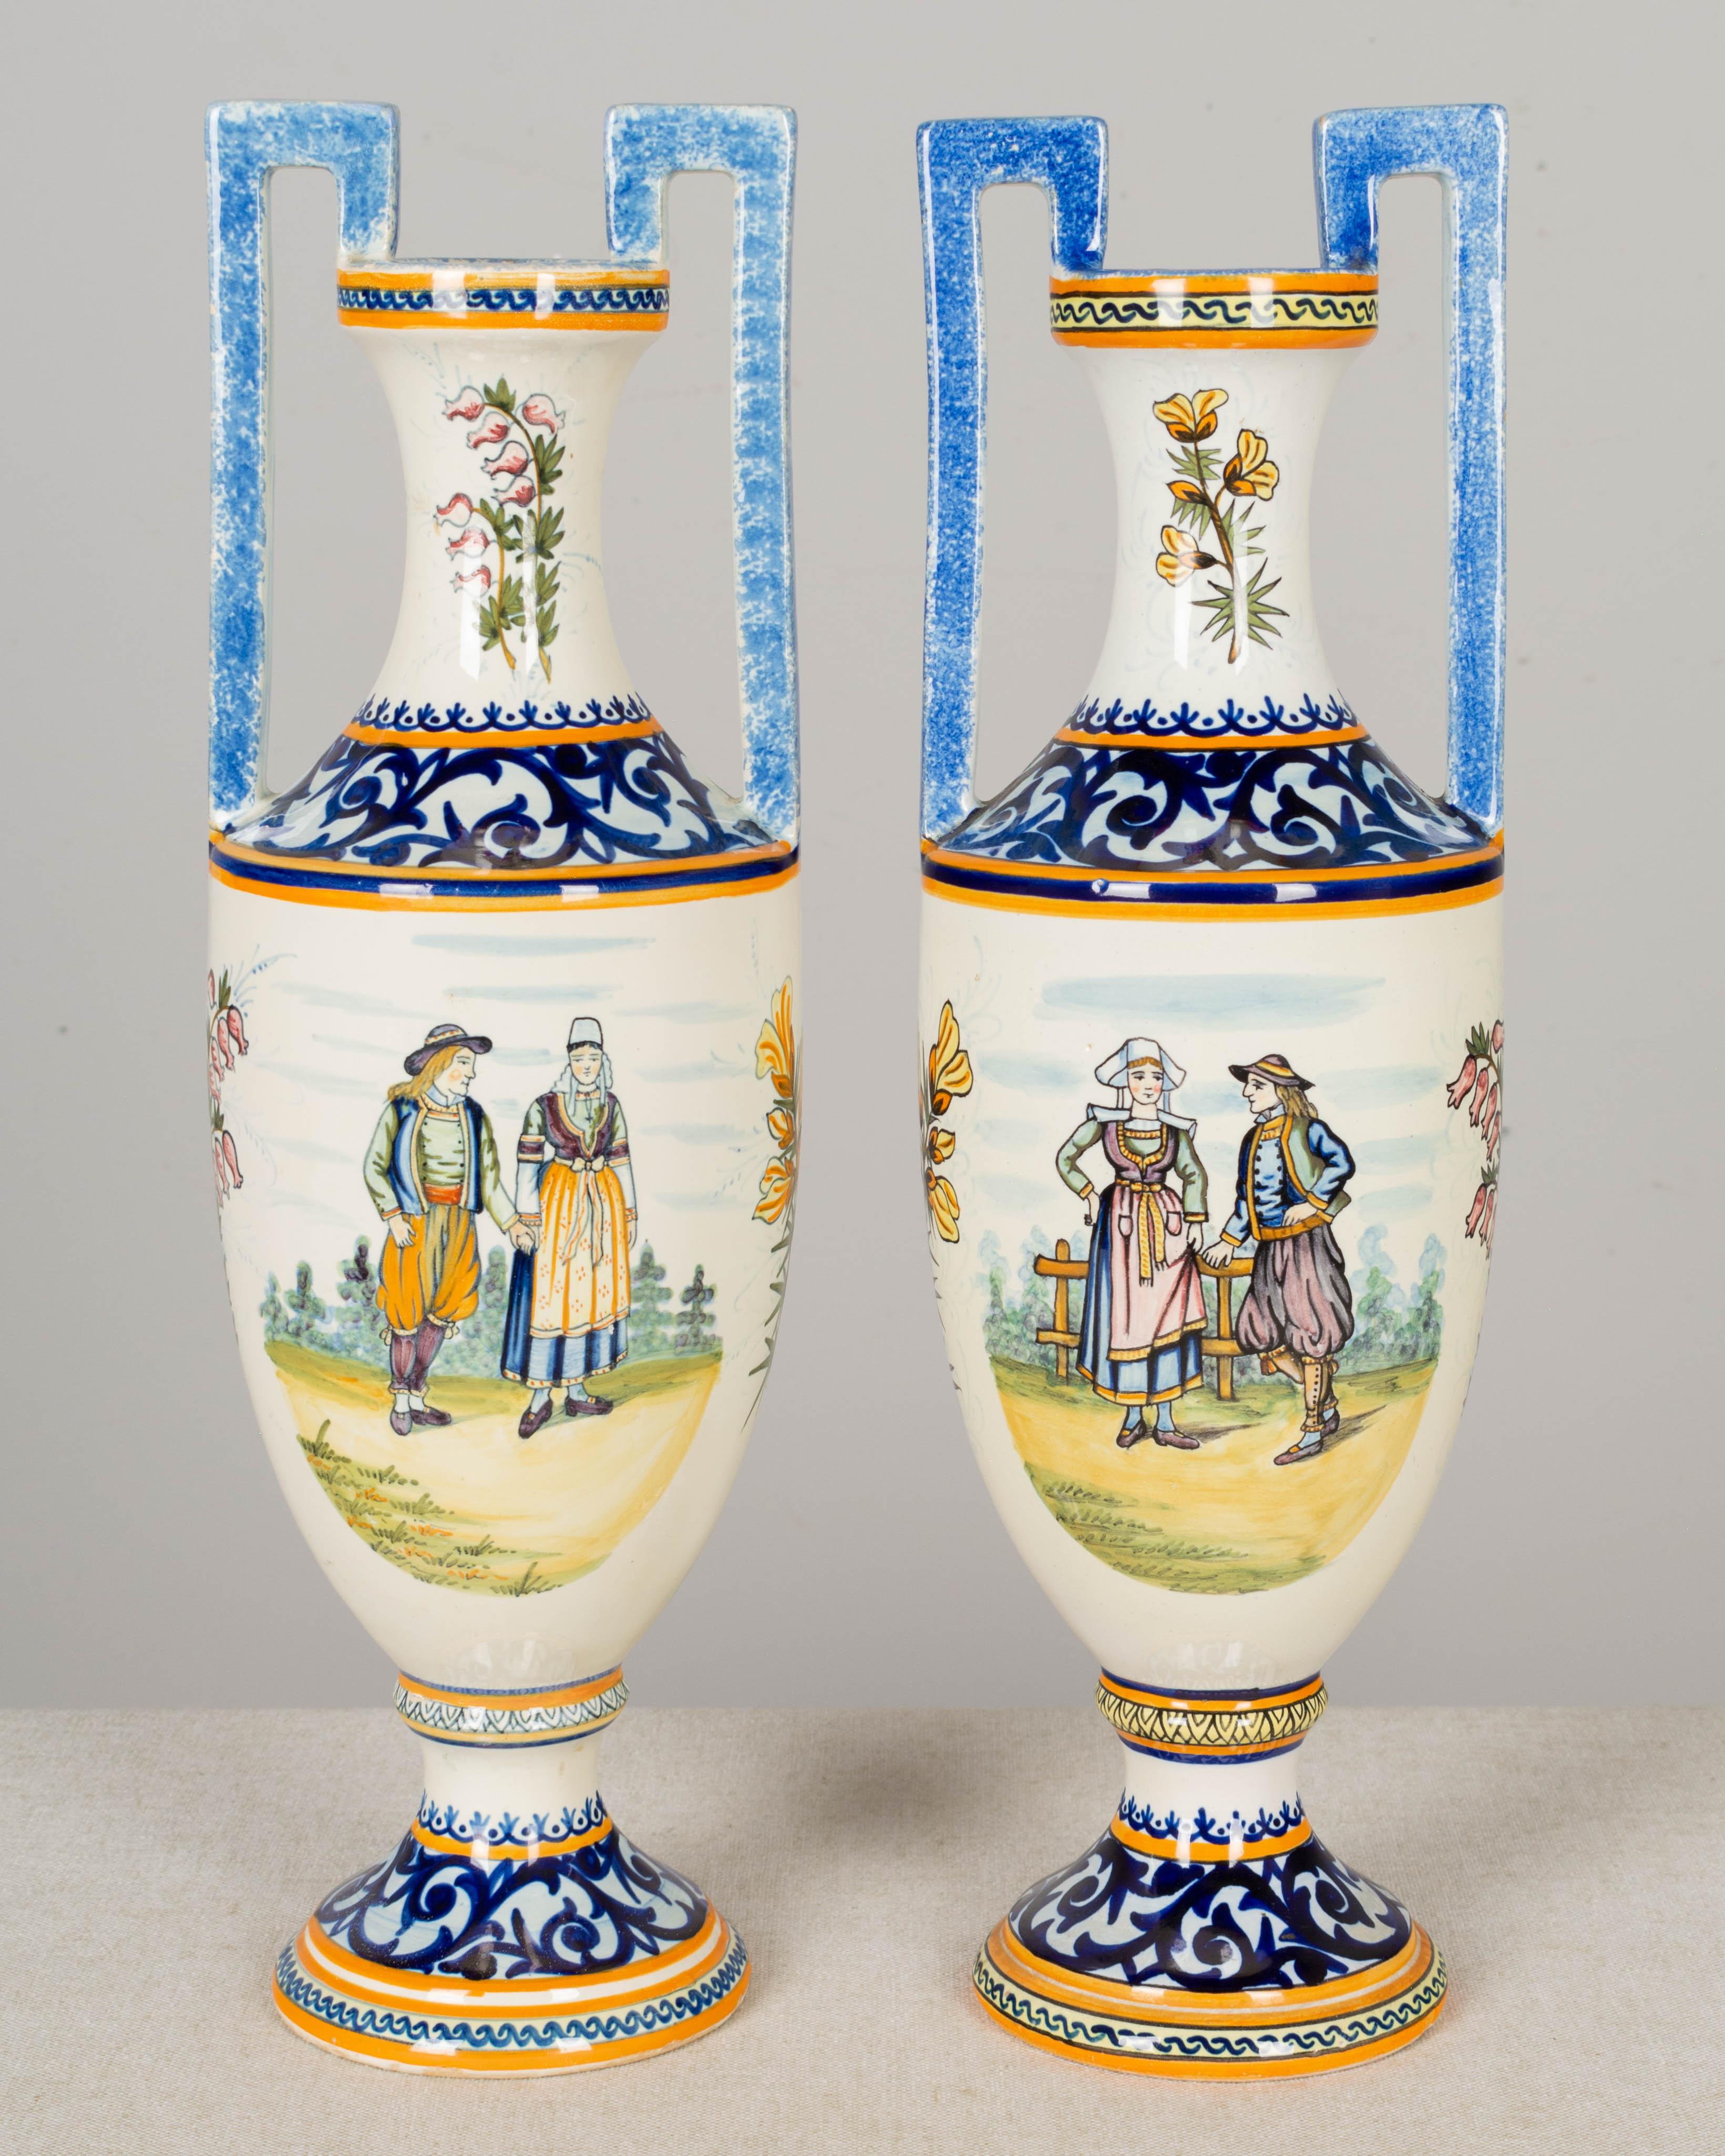 A set of two of French faience vases by Henriot Quimper, hand-painted with a man and woman depicted in traditional country attire in a pastoral setting. The reverse side each vase has an armorial crest, one with the crest of Bretagne and the other